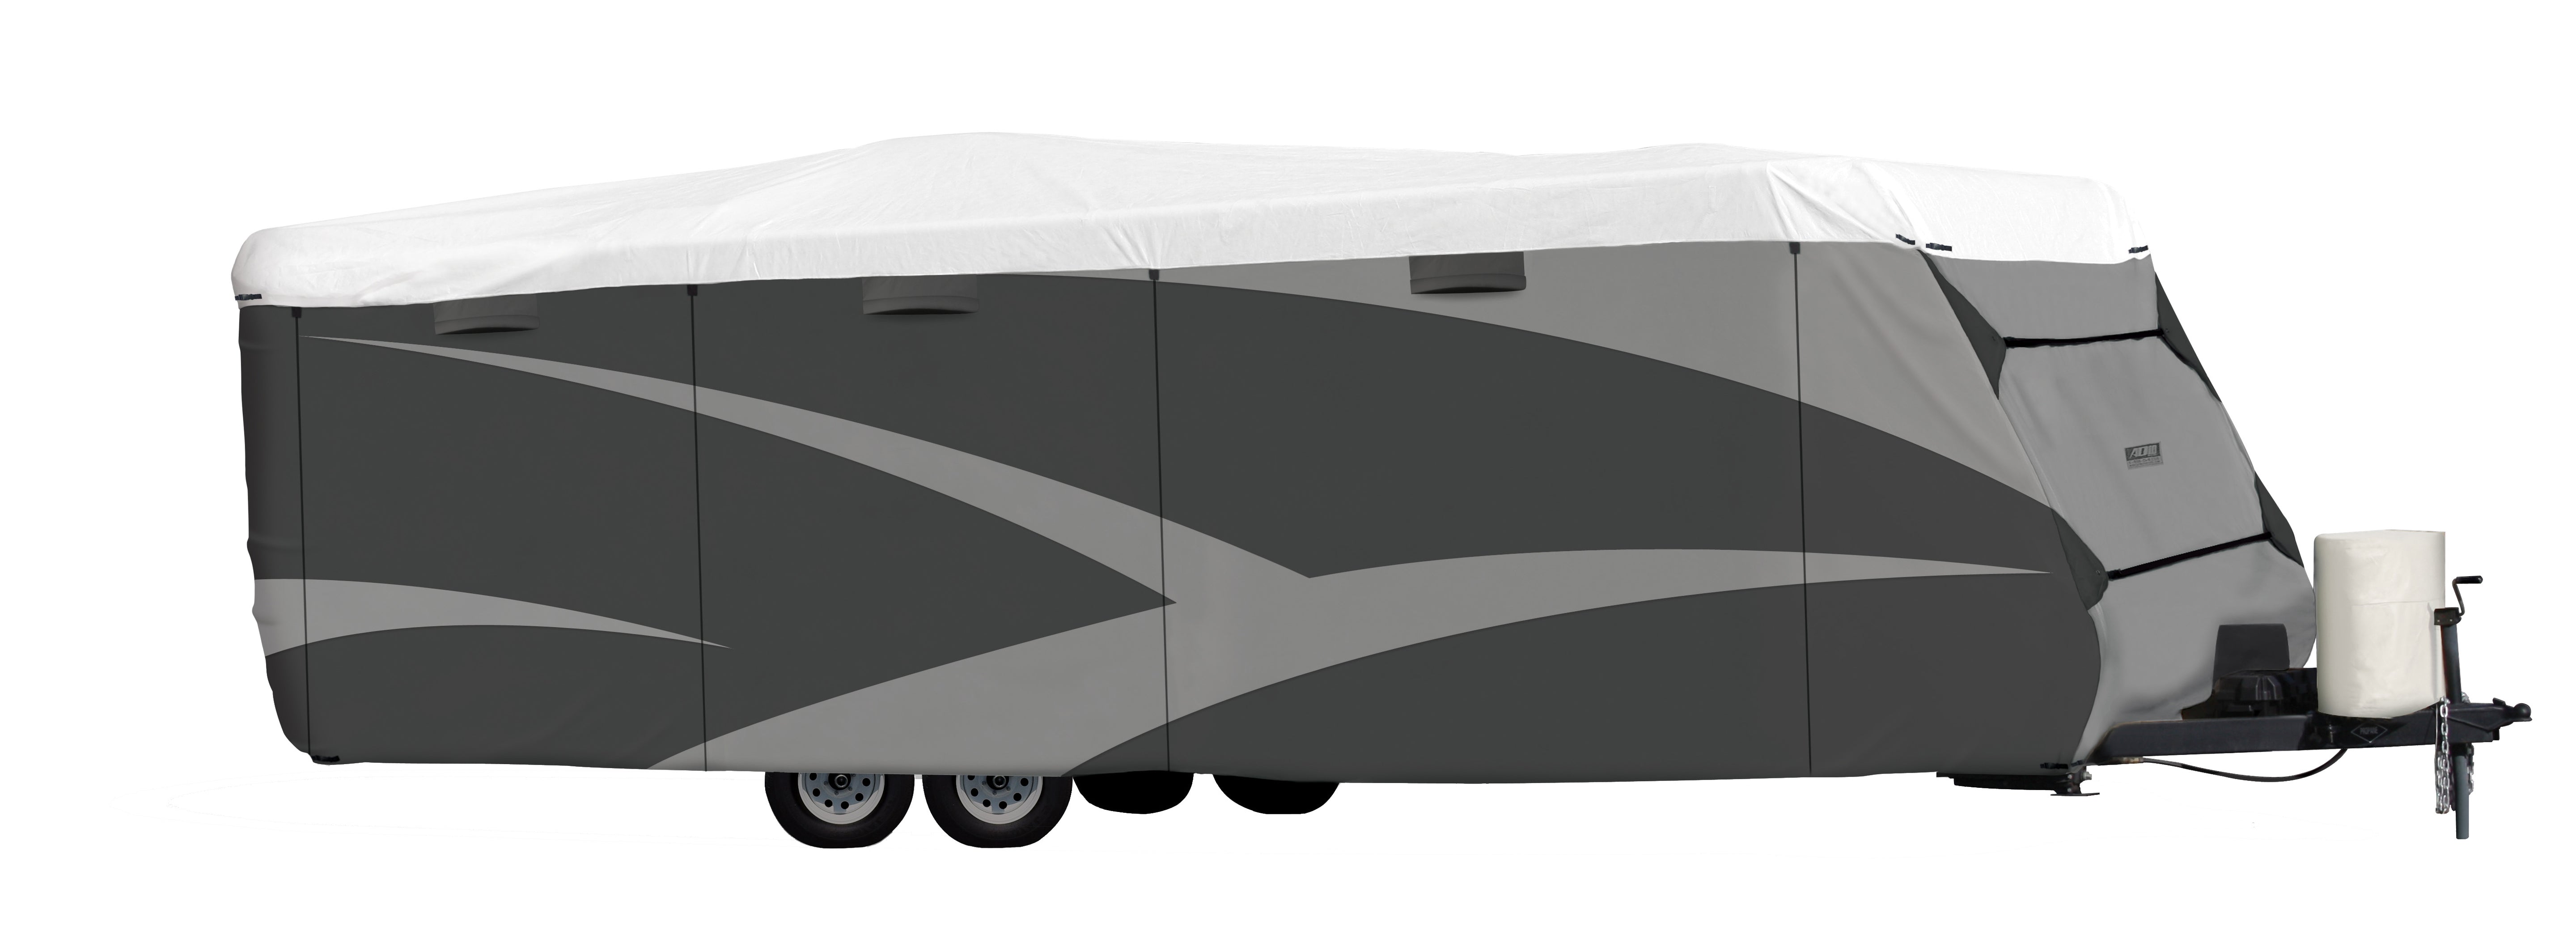 ADCO 36838 Designer Series Olefin HD Travel Trailer Cover - Up to 15' (183" L x 100" W x 90" H)